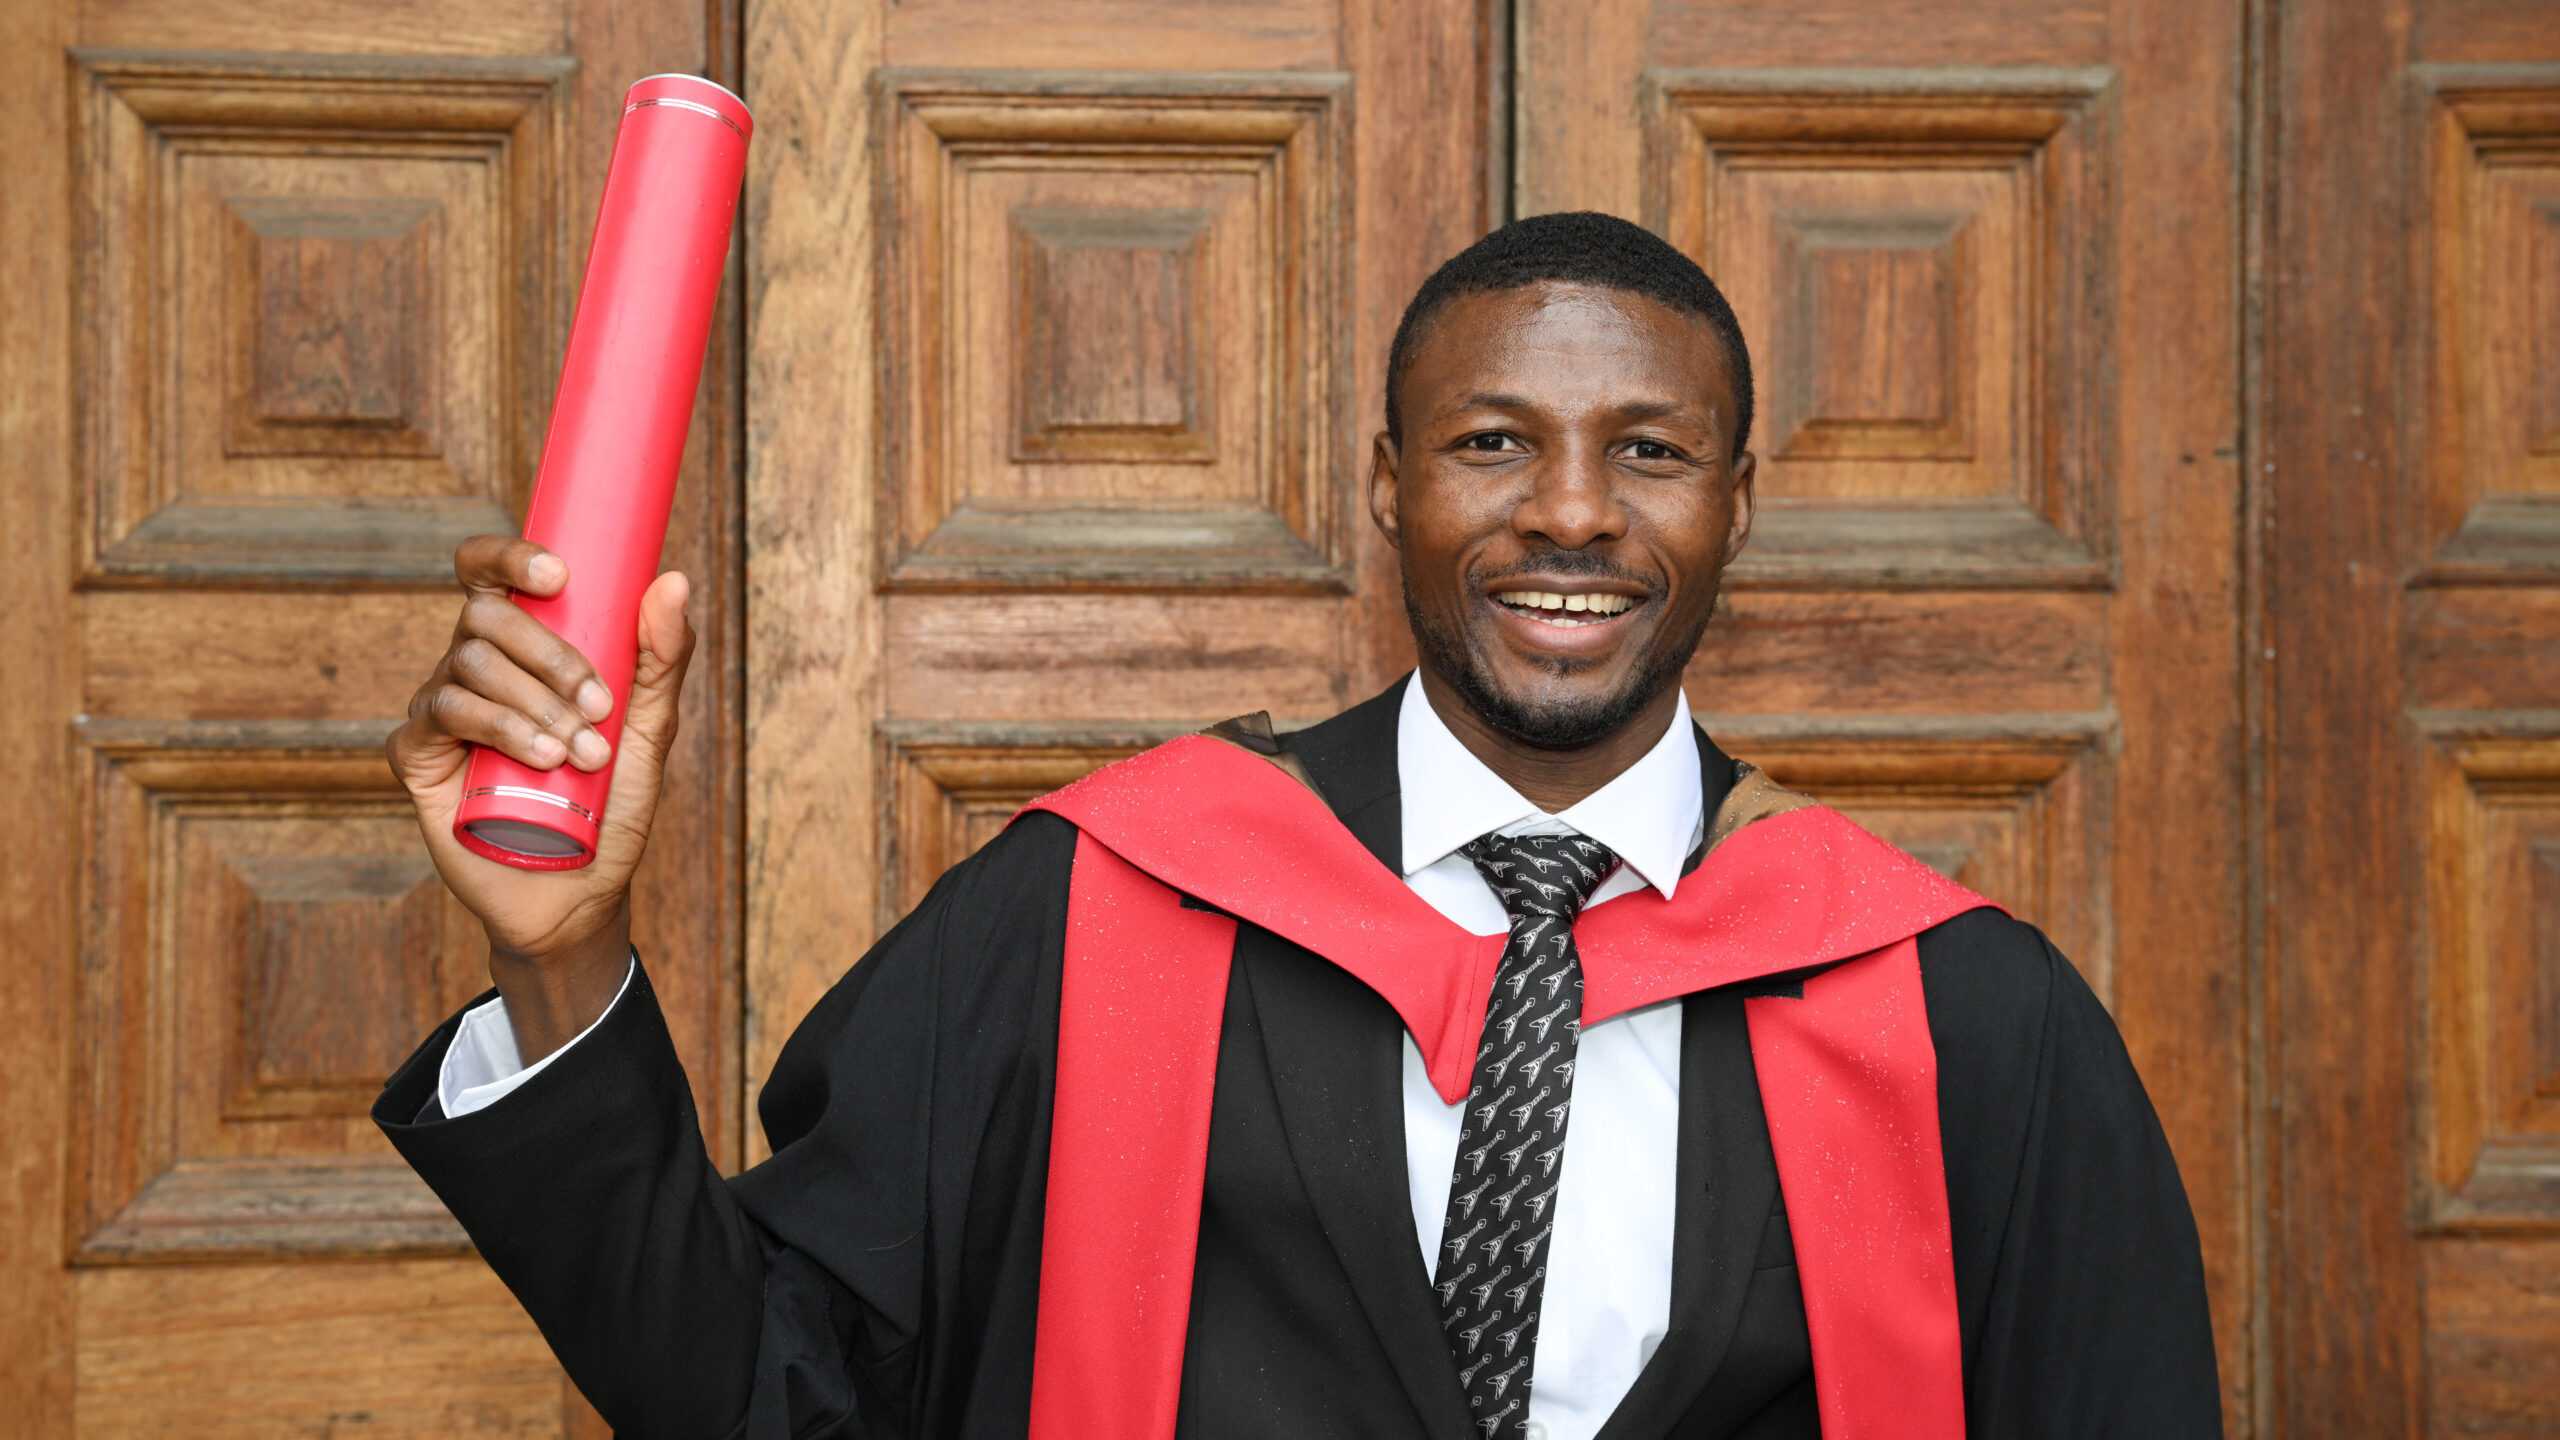 Graduate proudly holding up his red graduation scroll outside ornate wooden doors.